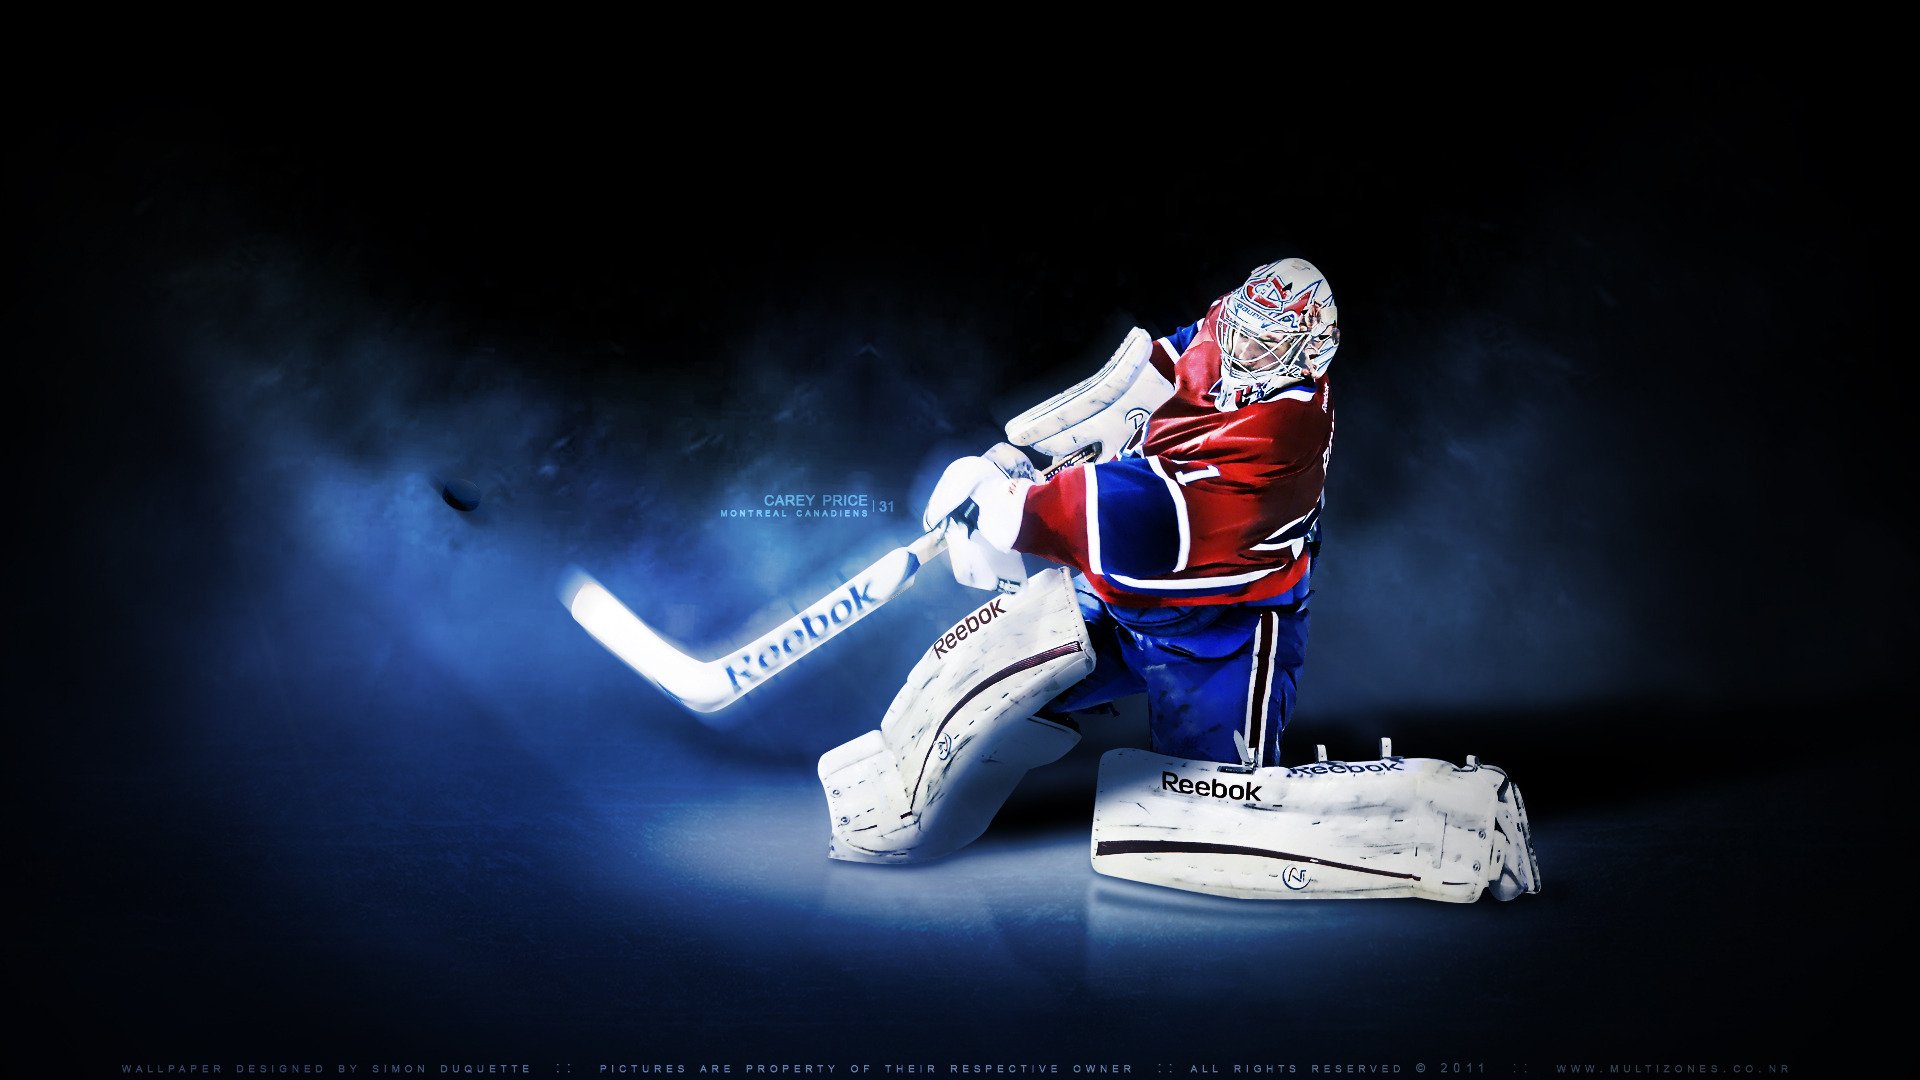 An NHL Wallpaper featuring Montreal Canadiens goaltender Carey Price 1920x1080